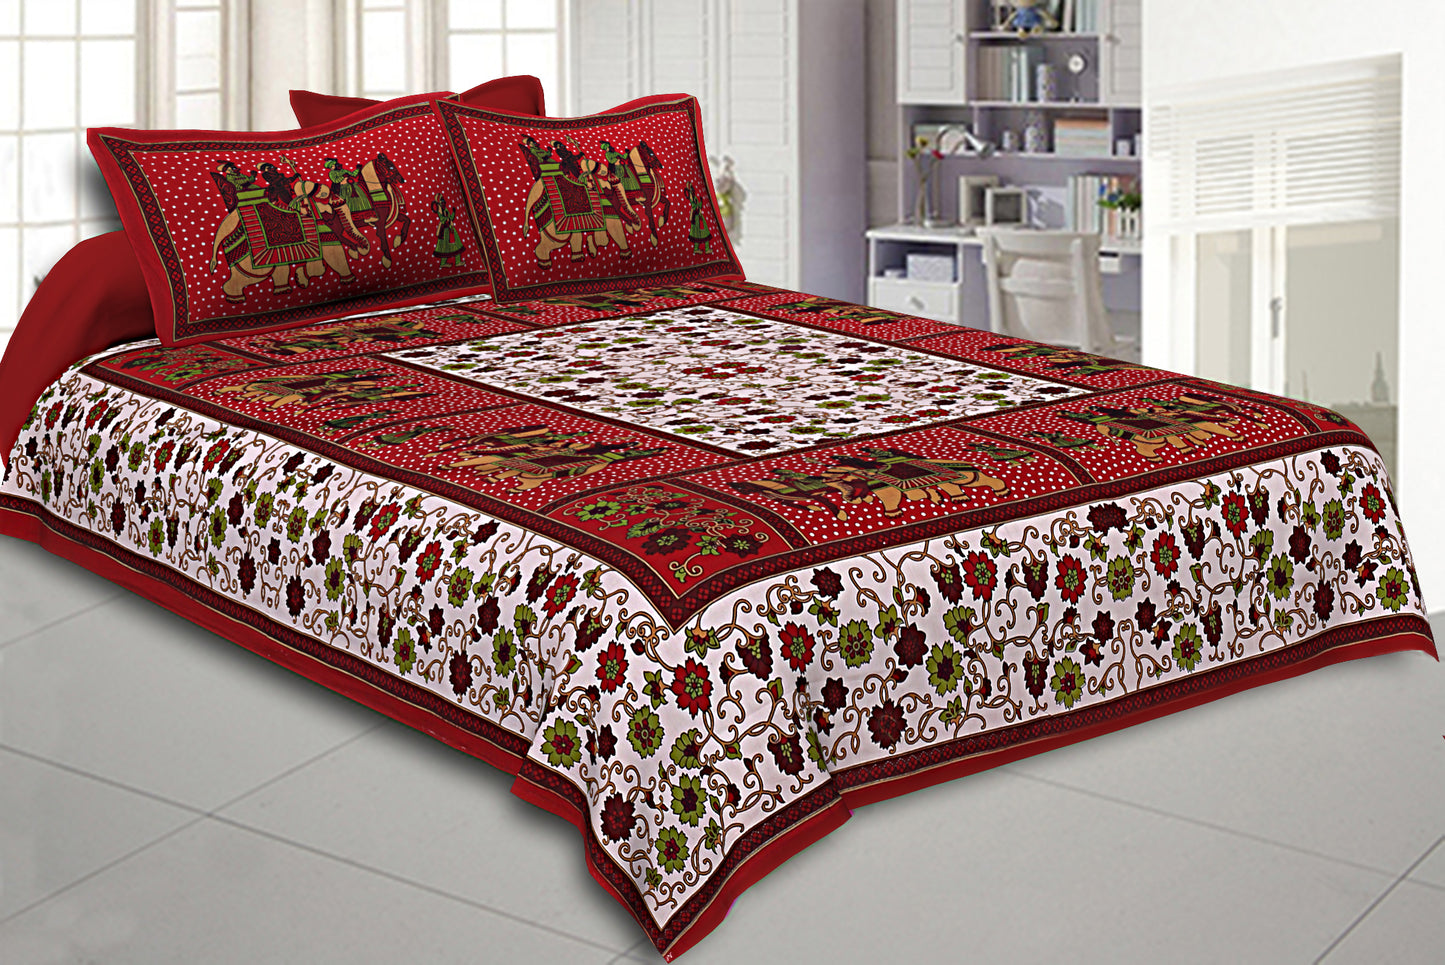 240 TC 100 % Pure Cotton Paisley Floral Ethnic Peach Border Jaipuri BedSheet with 2 Pillow Covers